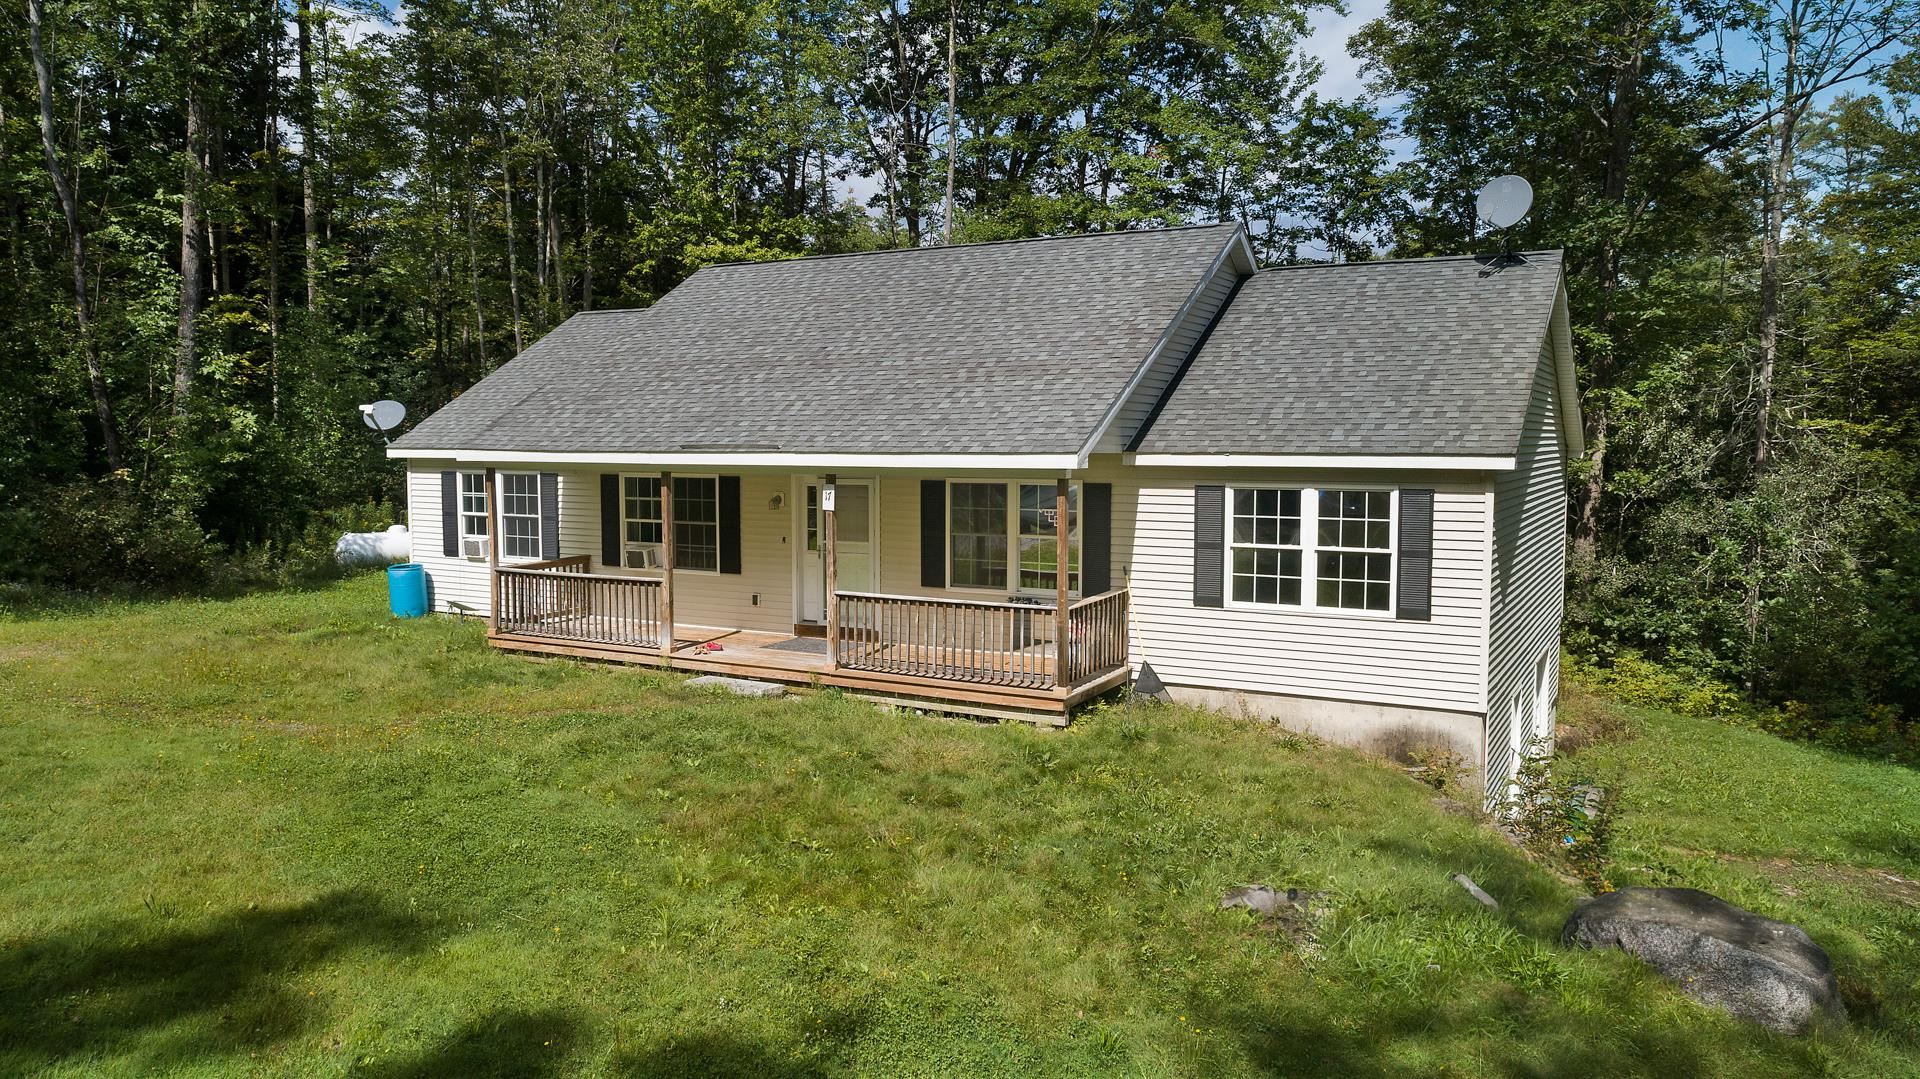 Waterfront Homes for Sale in Croydon NH